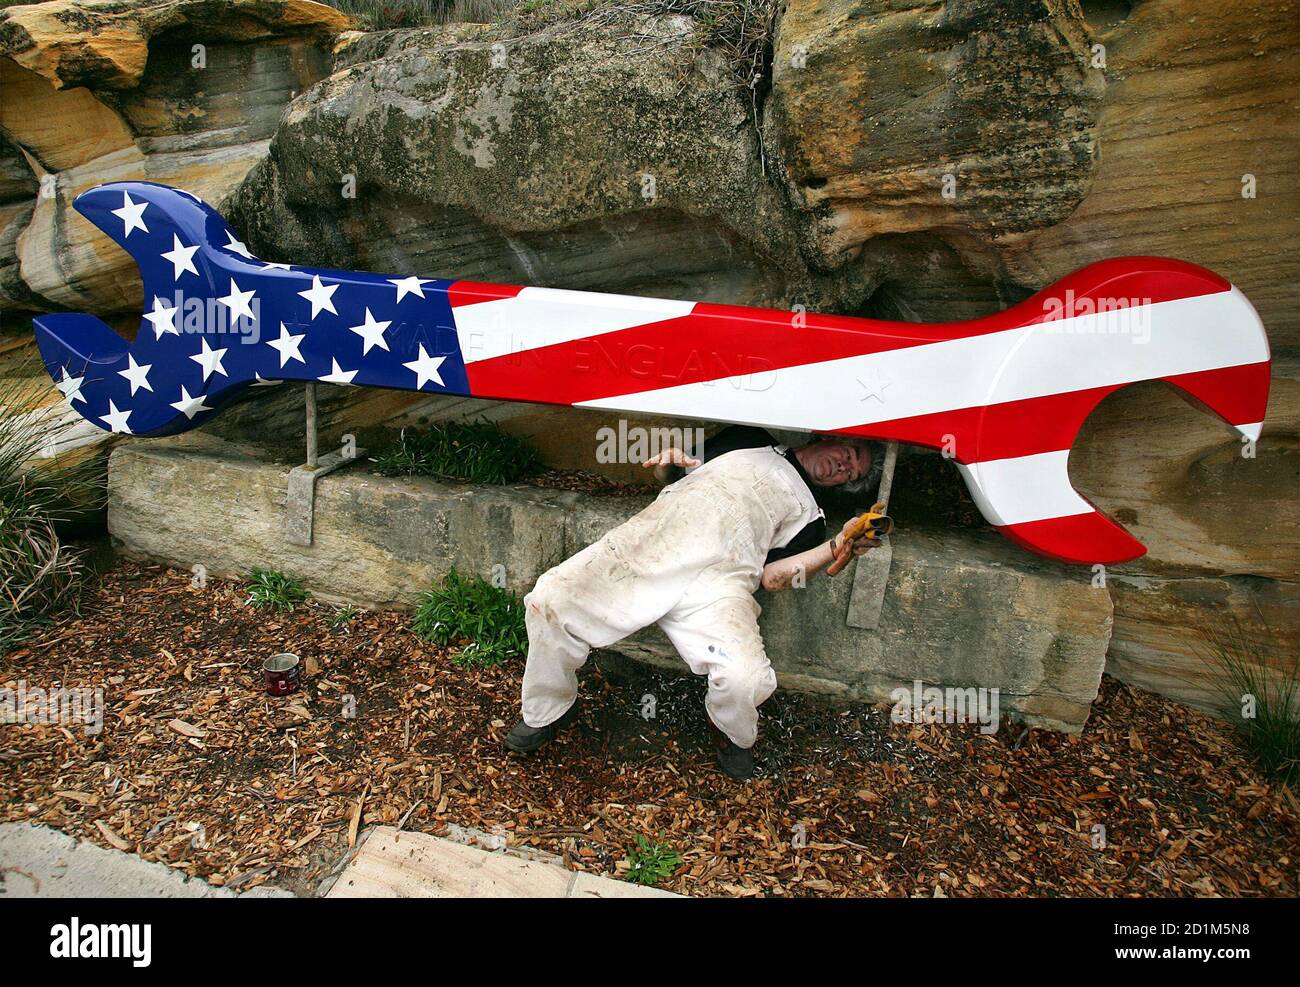 Artist Peter Adams eases out from underneath his artwork called 'A Star Bangled Spanner" after installing it on a cliff near Bondi Beach in Sydney Novembr 1, 2005. Adams says his artwork, made of timber, fibreglass, resin, steel and wood, represents the United States' meddling in world affairs, causing unrest to continue, like a "spanner in the works". The work is one of over over 100 exhibits from Australian and international artists participating in the annual 'Sculpture by the Sea' event which is in its ninth year. Foto Stock